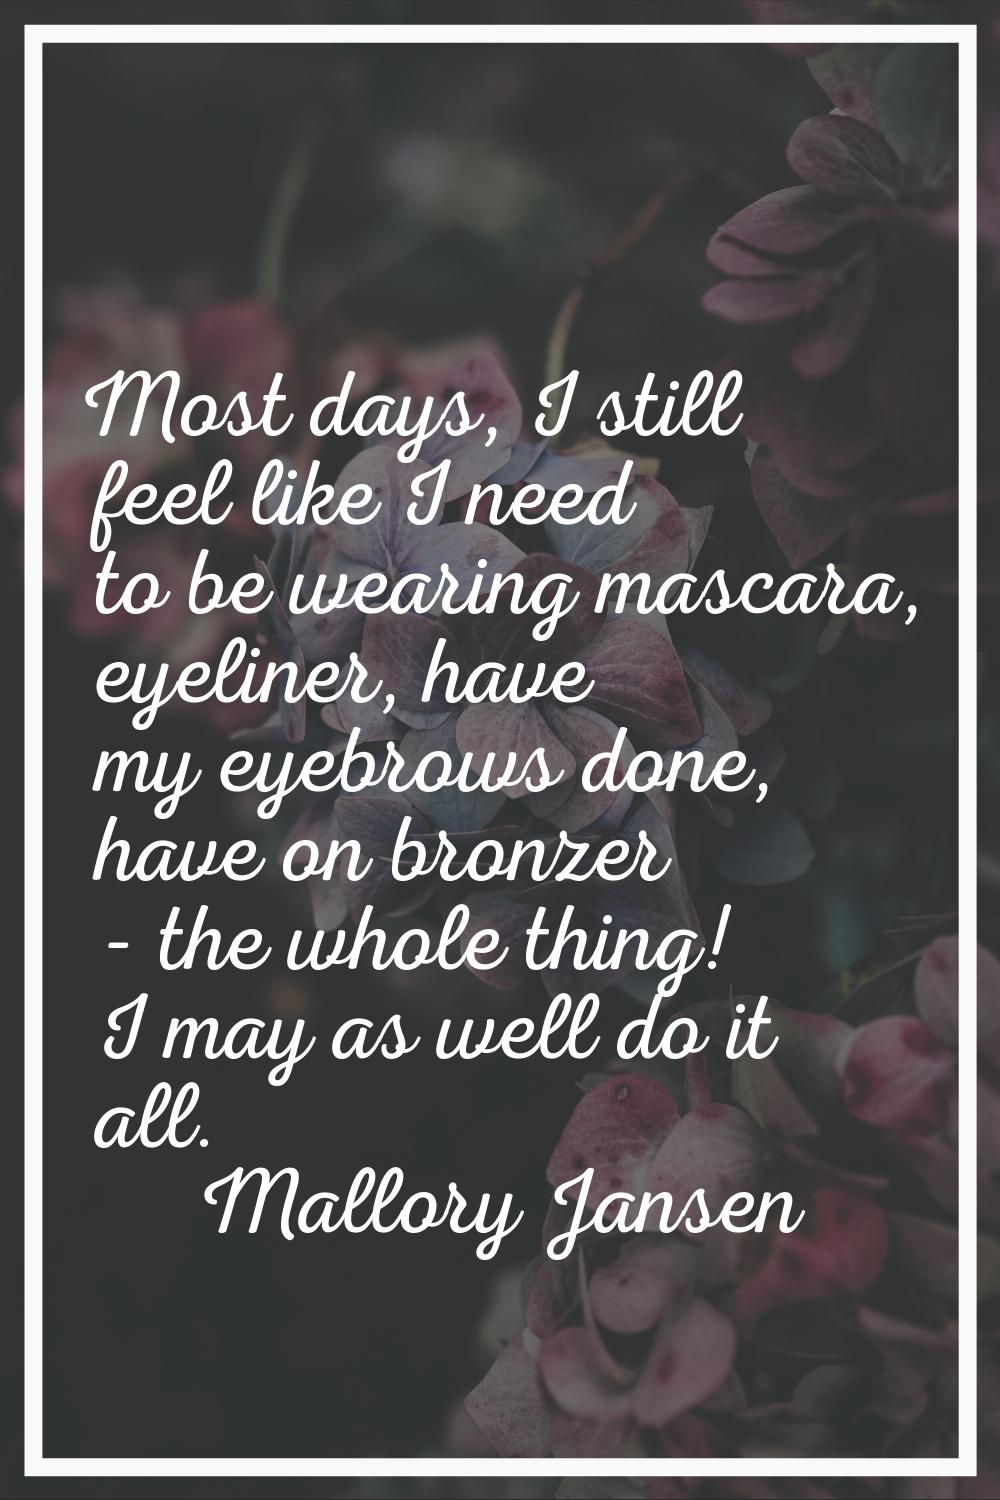 Most days, I still feel like I need to be wearing mascara, eyeliner, have my eyebrows done, have on